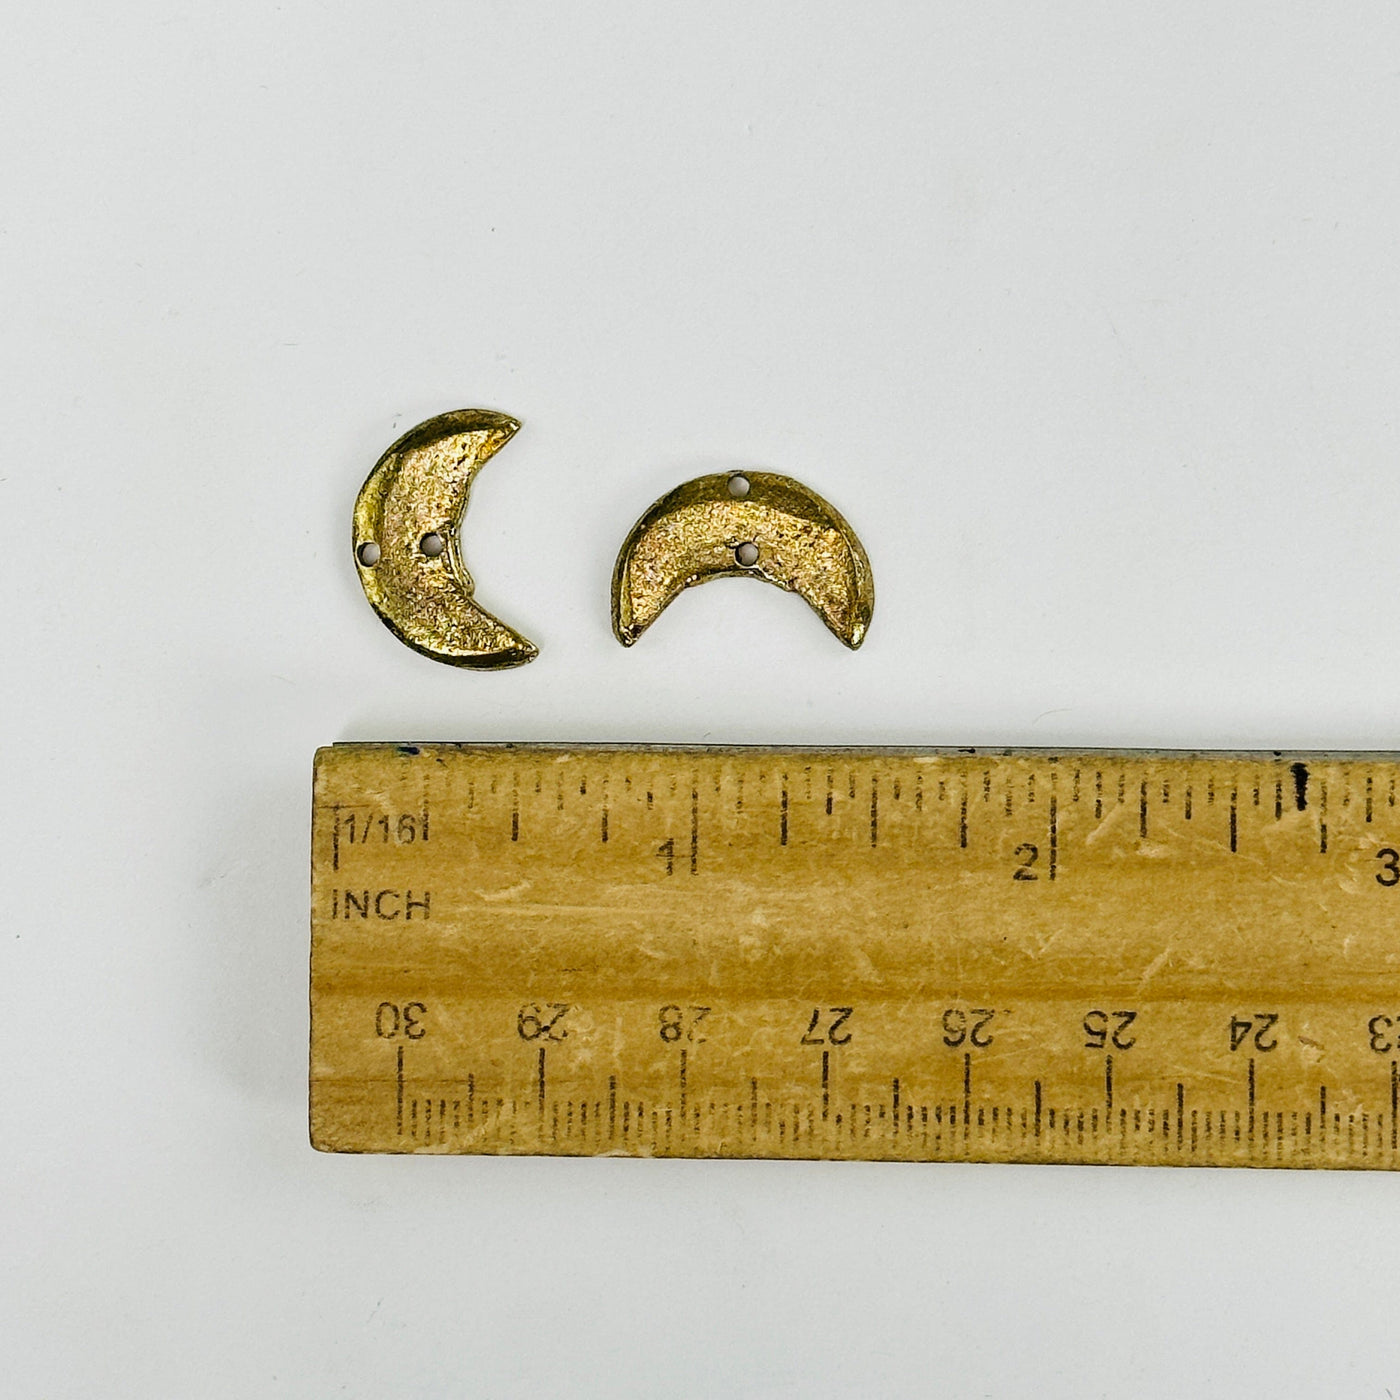 moon pendants next to a ruler for size reference